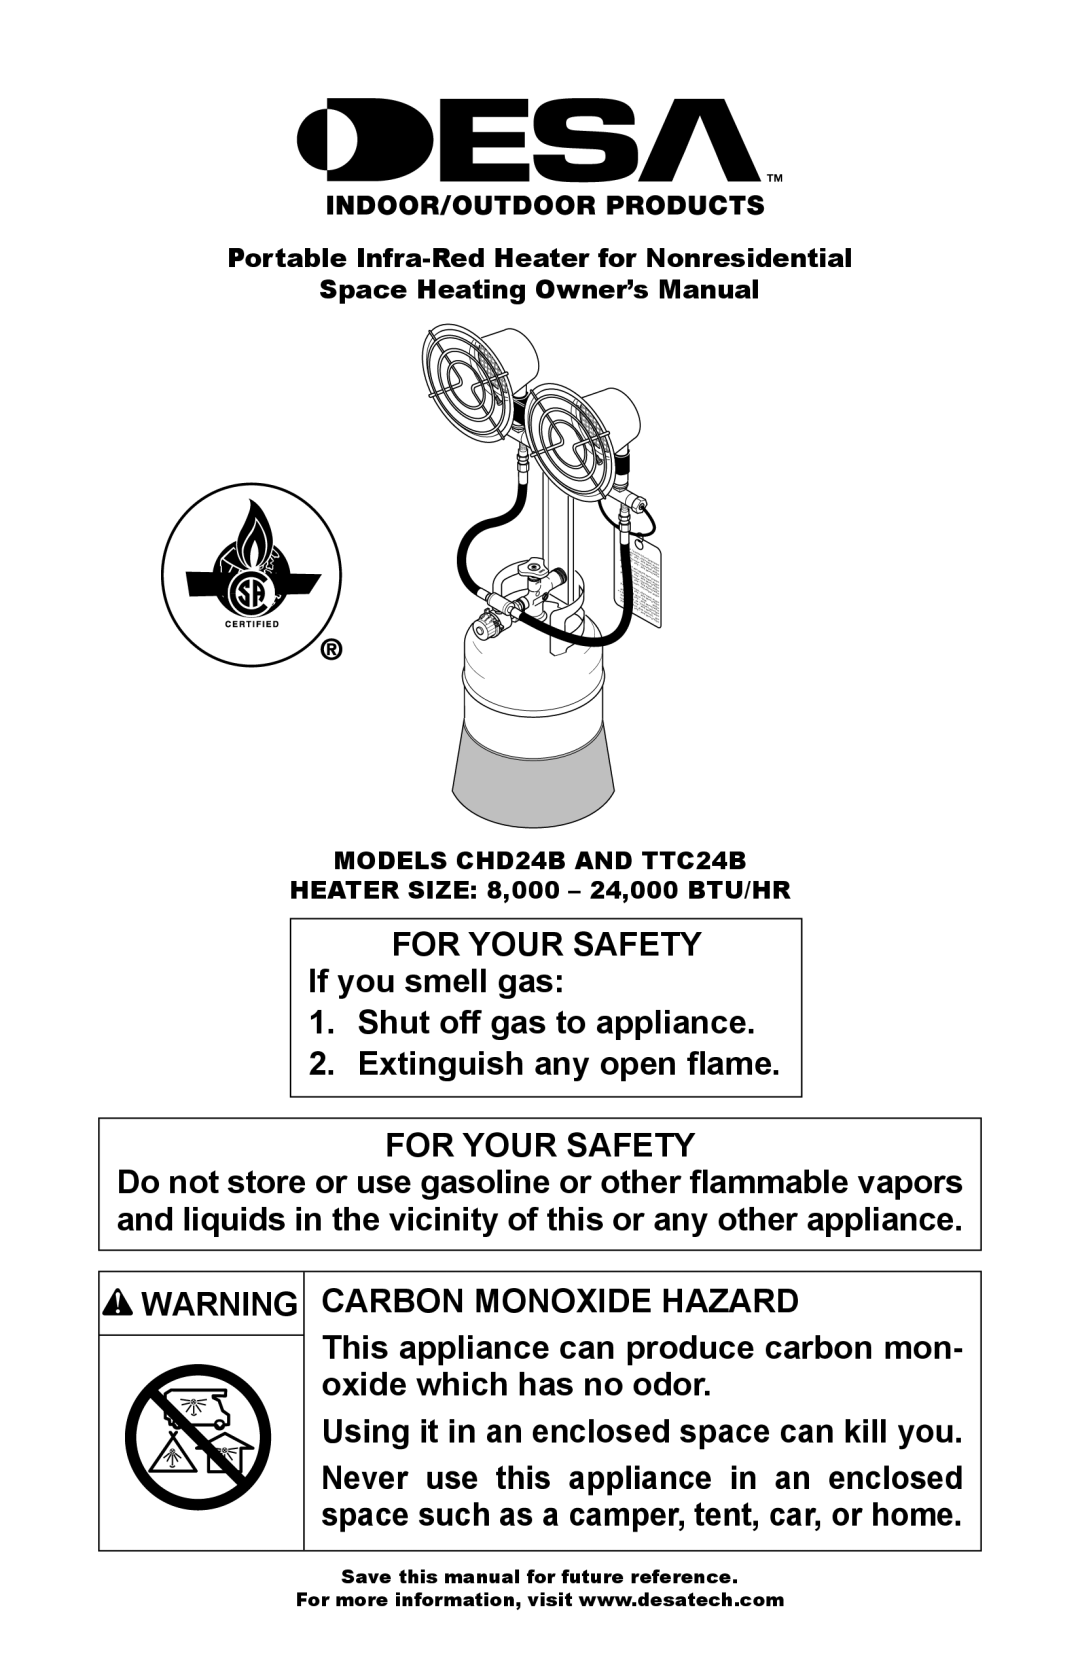 Desa TTC24B, CHD24B owner manual FOR YOUR SAFETY If you smell gas, Shut off gas to appliance, Carbon Monoxide Hazard 